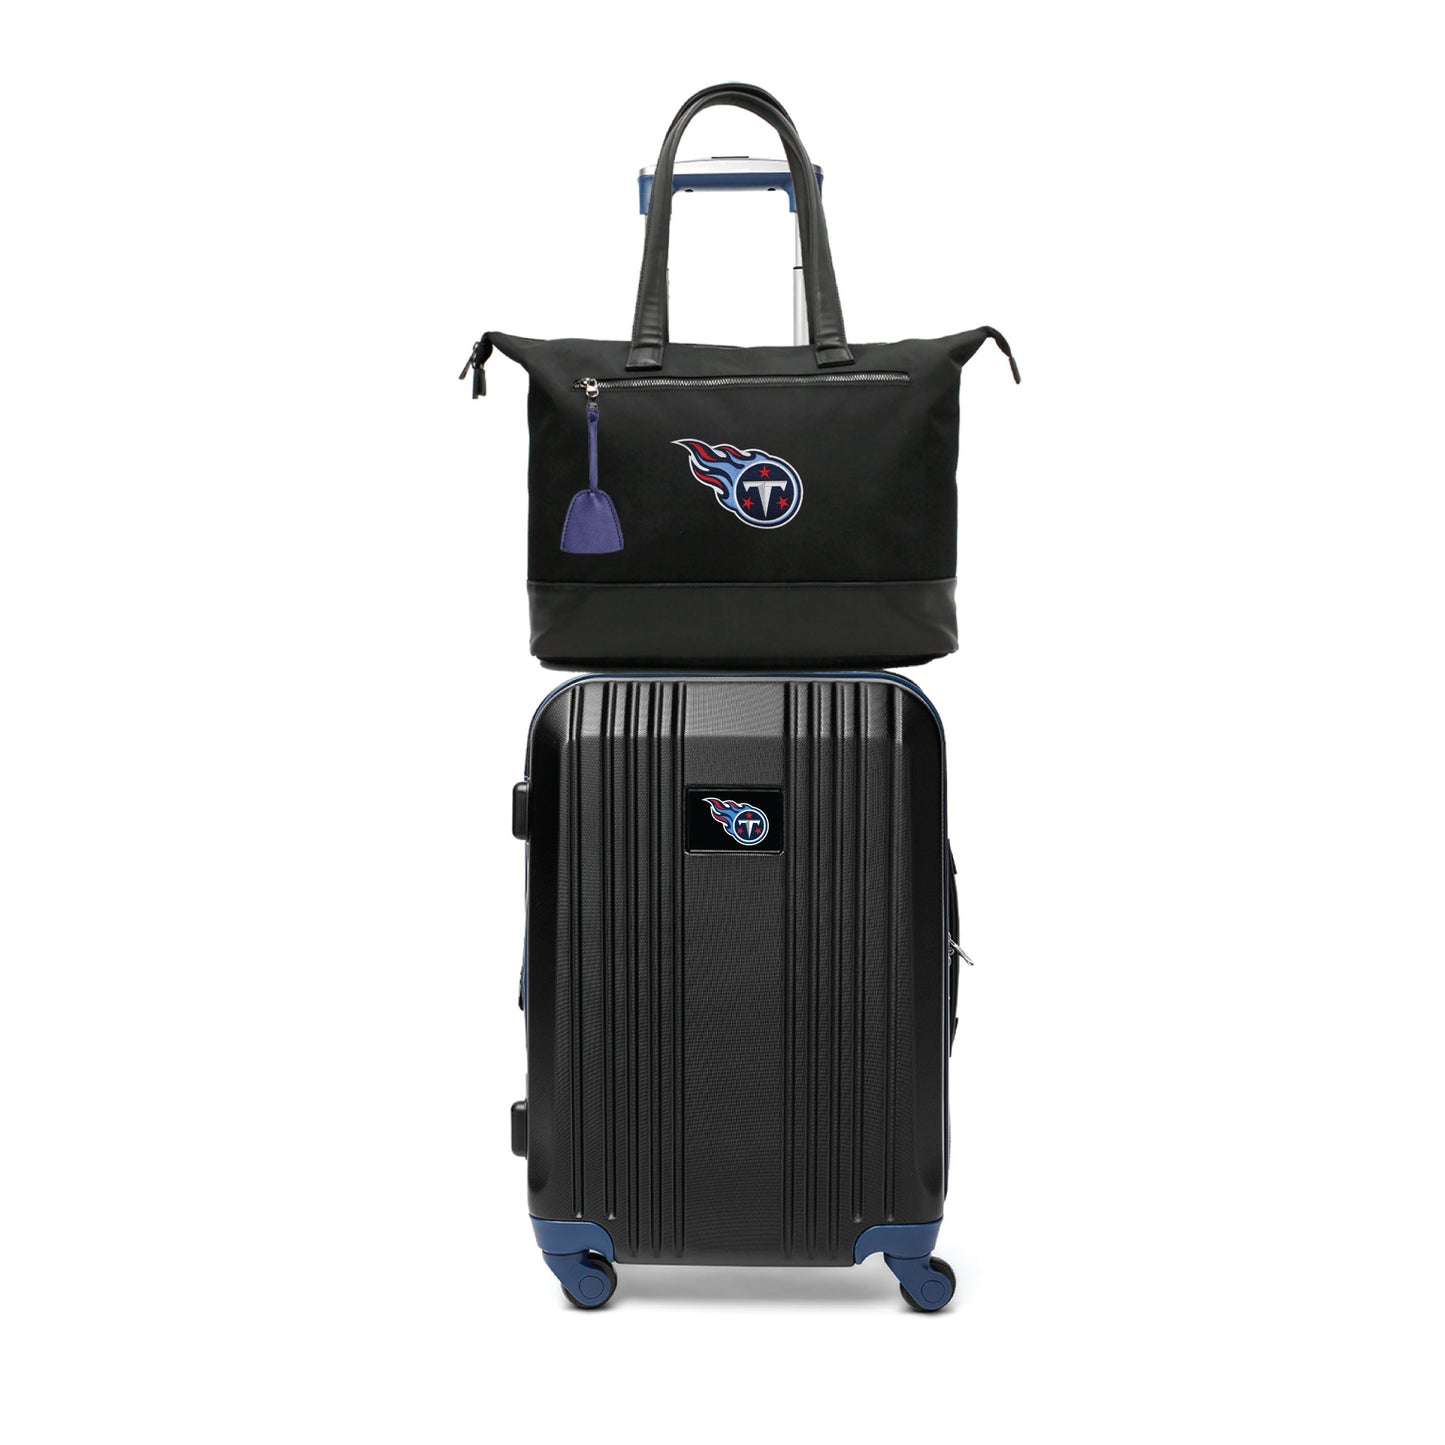 Tennessee Titans Premium Laptop Tote Bag and Luggage Set